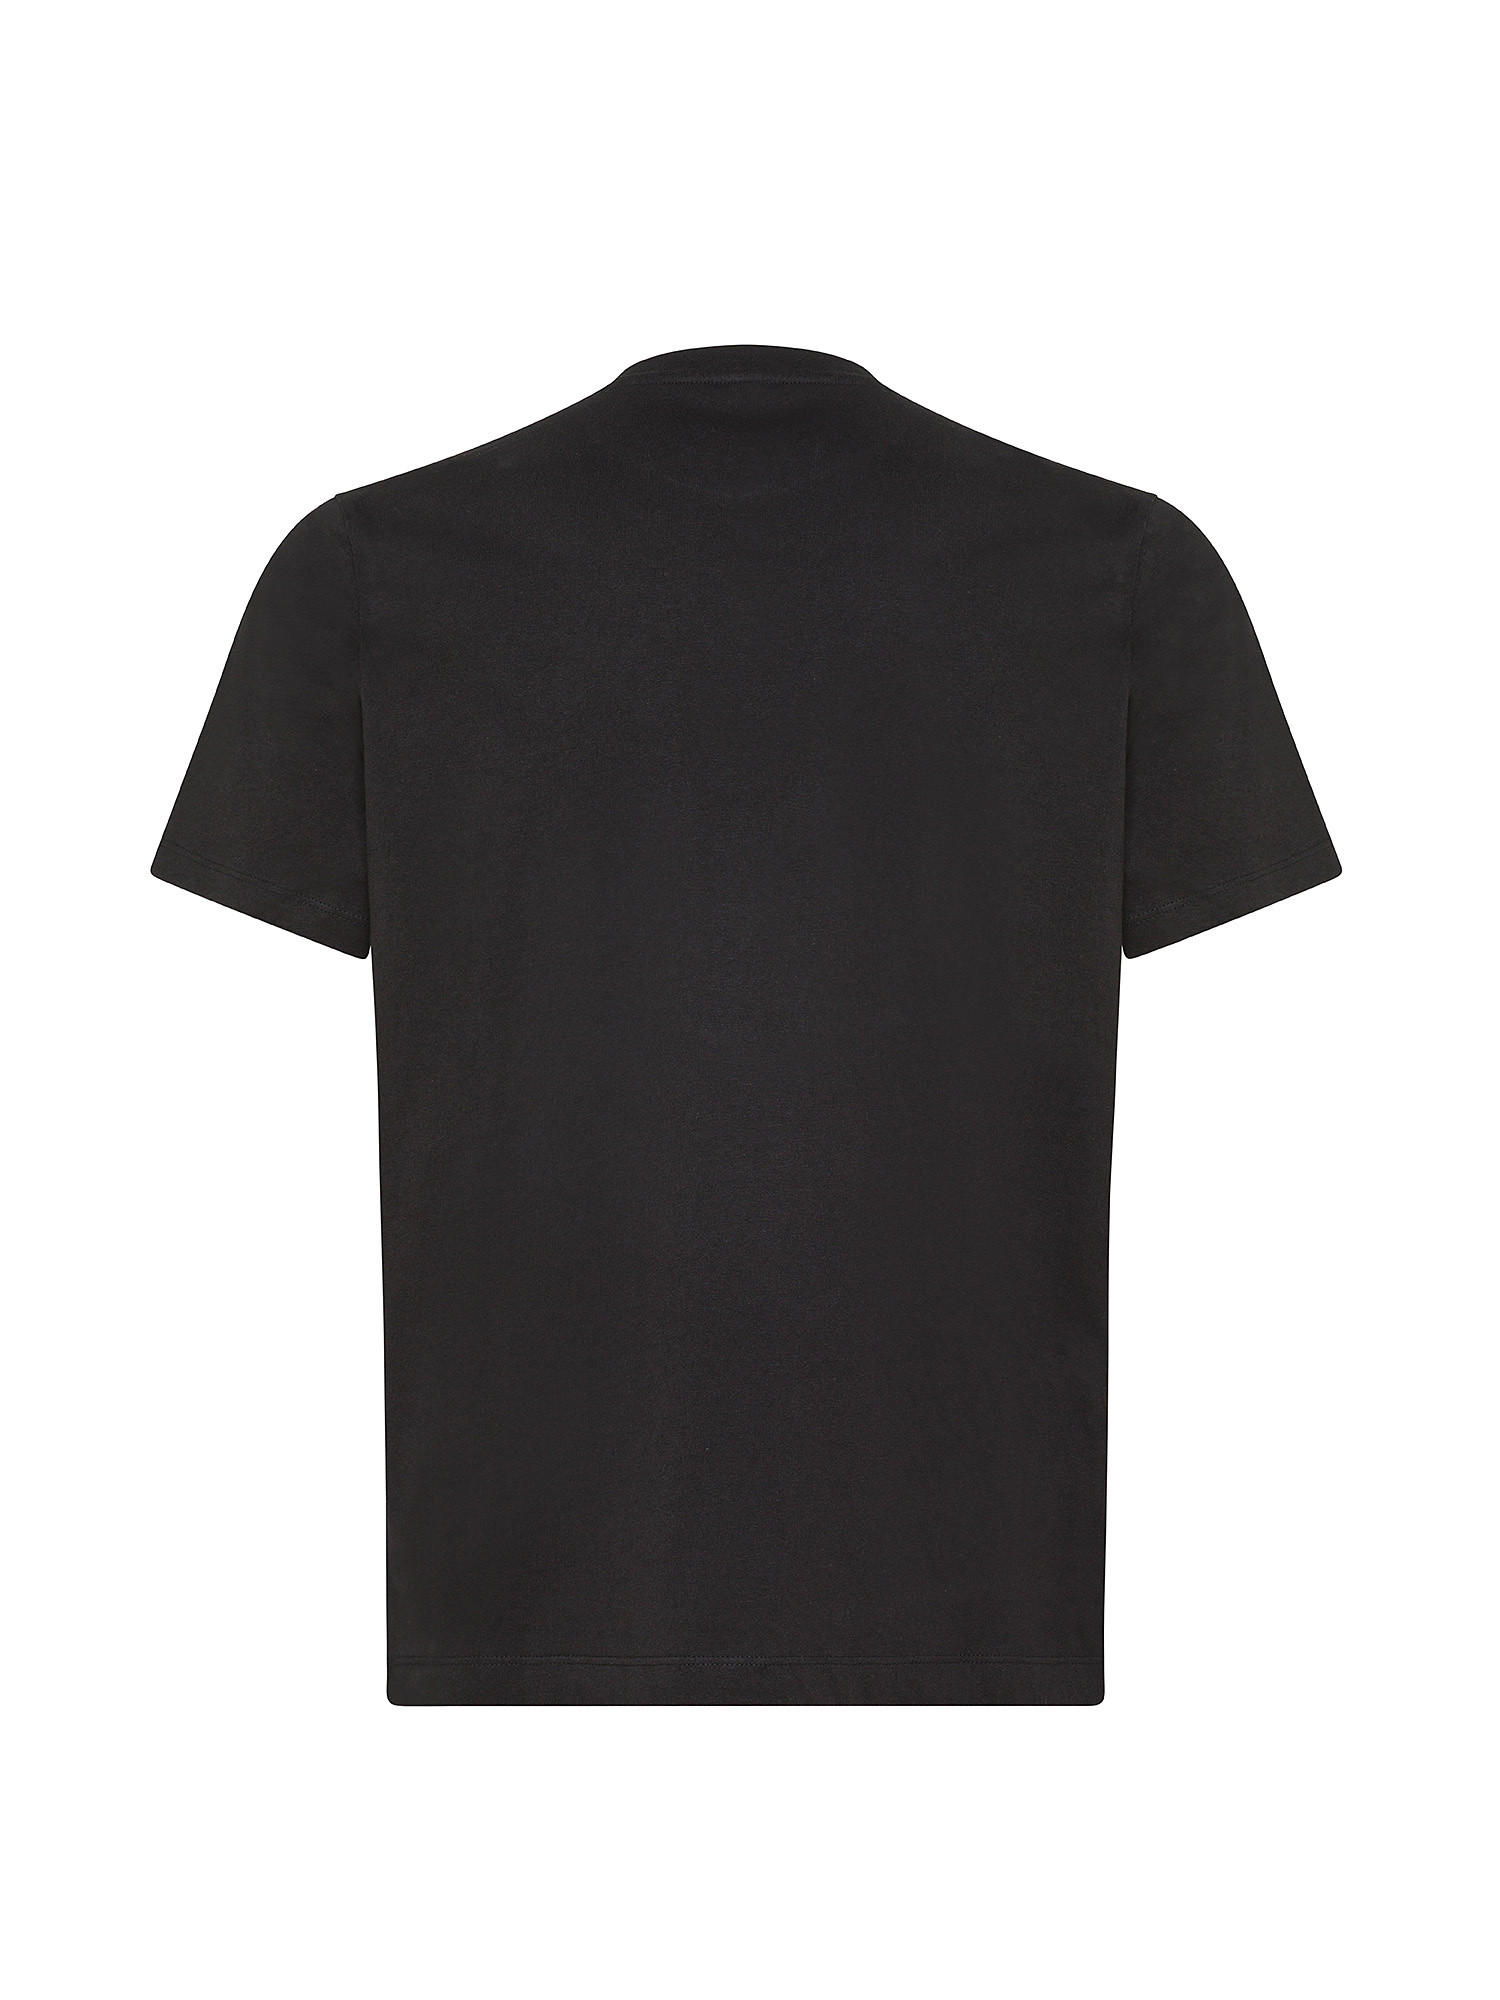 North Sails - Organic cotton jersey T-shirt with micrologo, Black, large image number 1